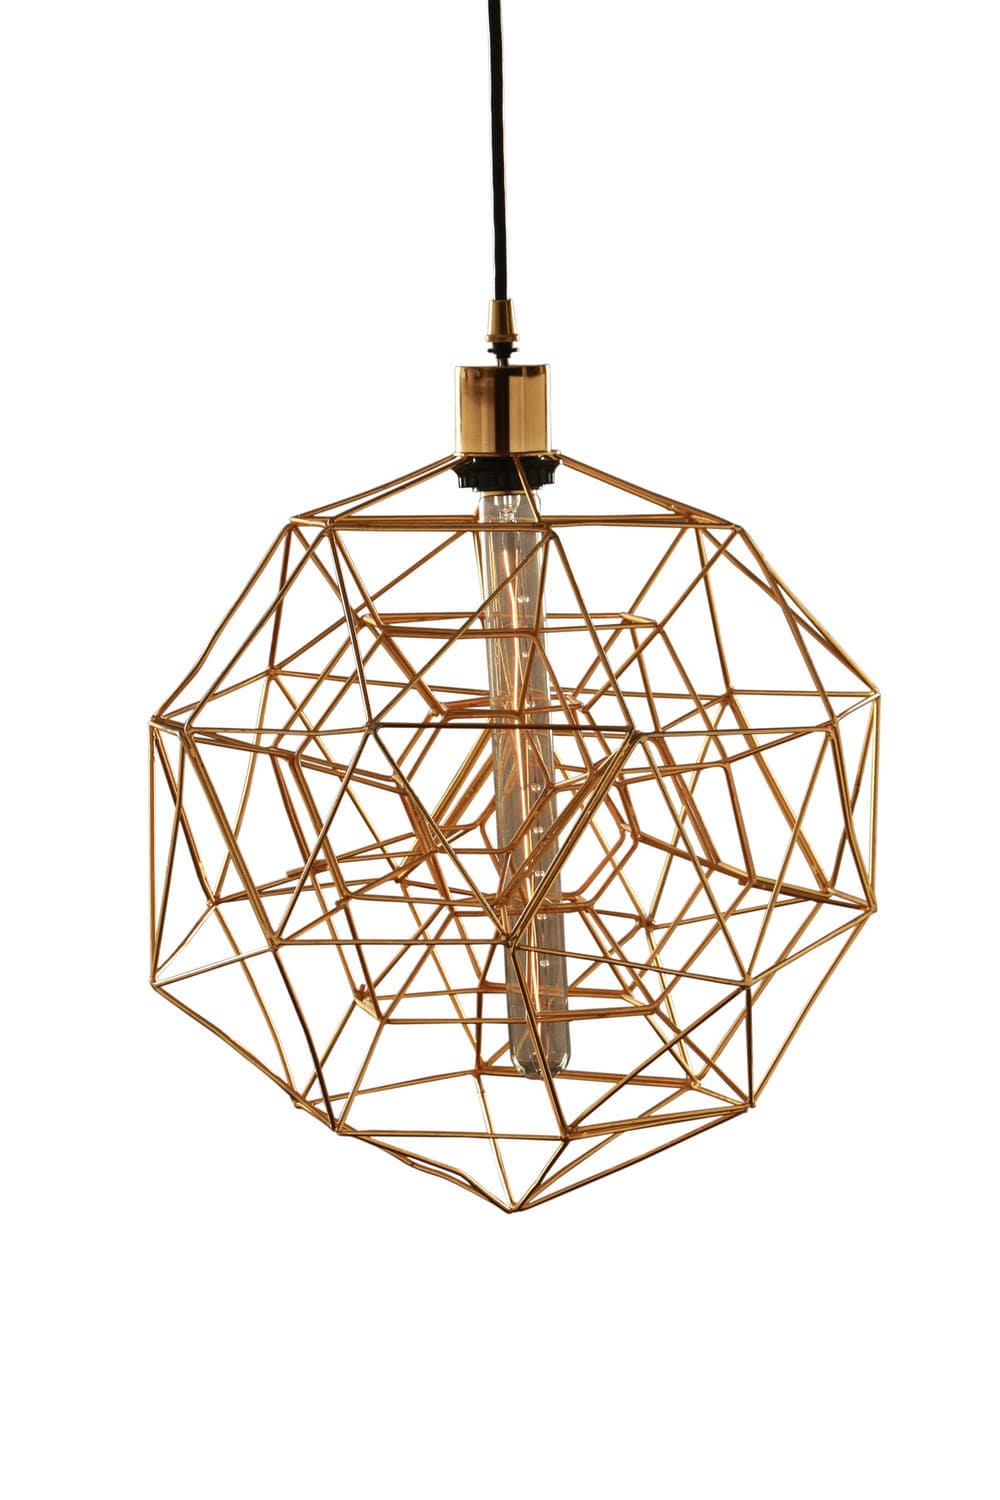 Renwil - LPC4058 - One Light Ceiling Fixture - Sidereal - Gold Plated